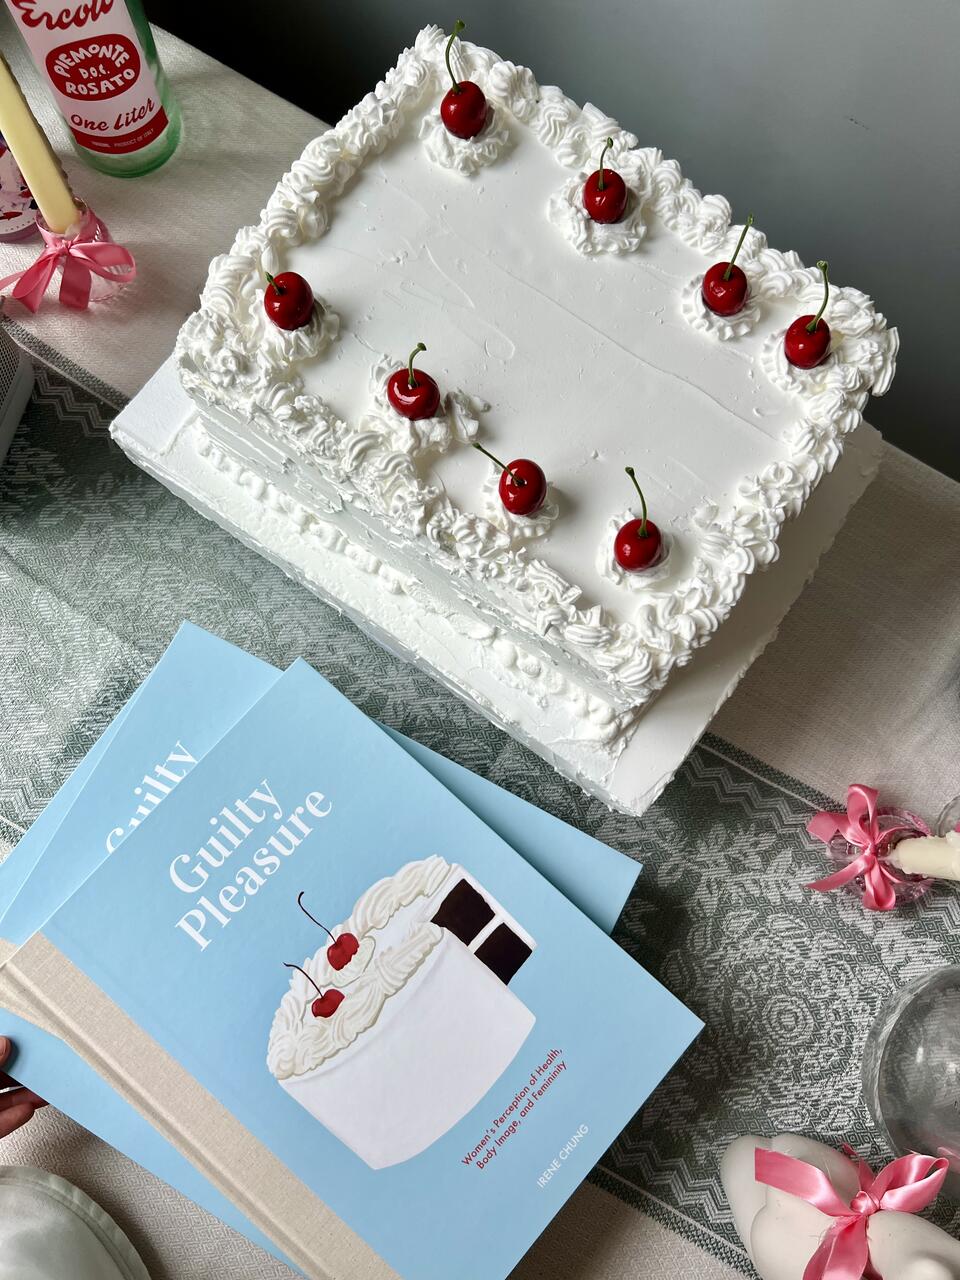 photo of illustrated books next to a white-cream cake with cherries on top, on the surface of tablecloth